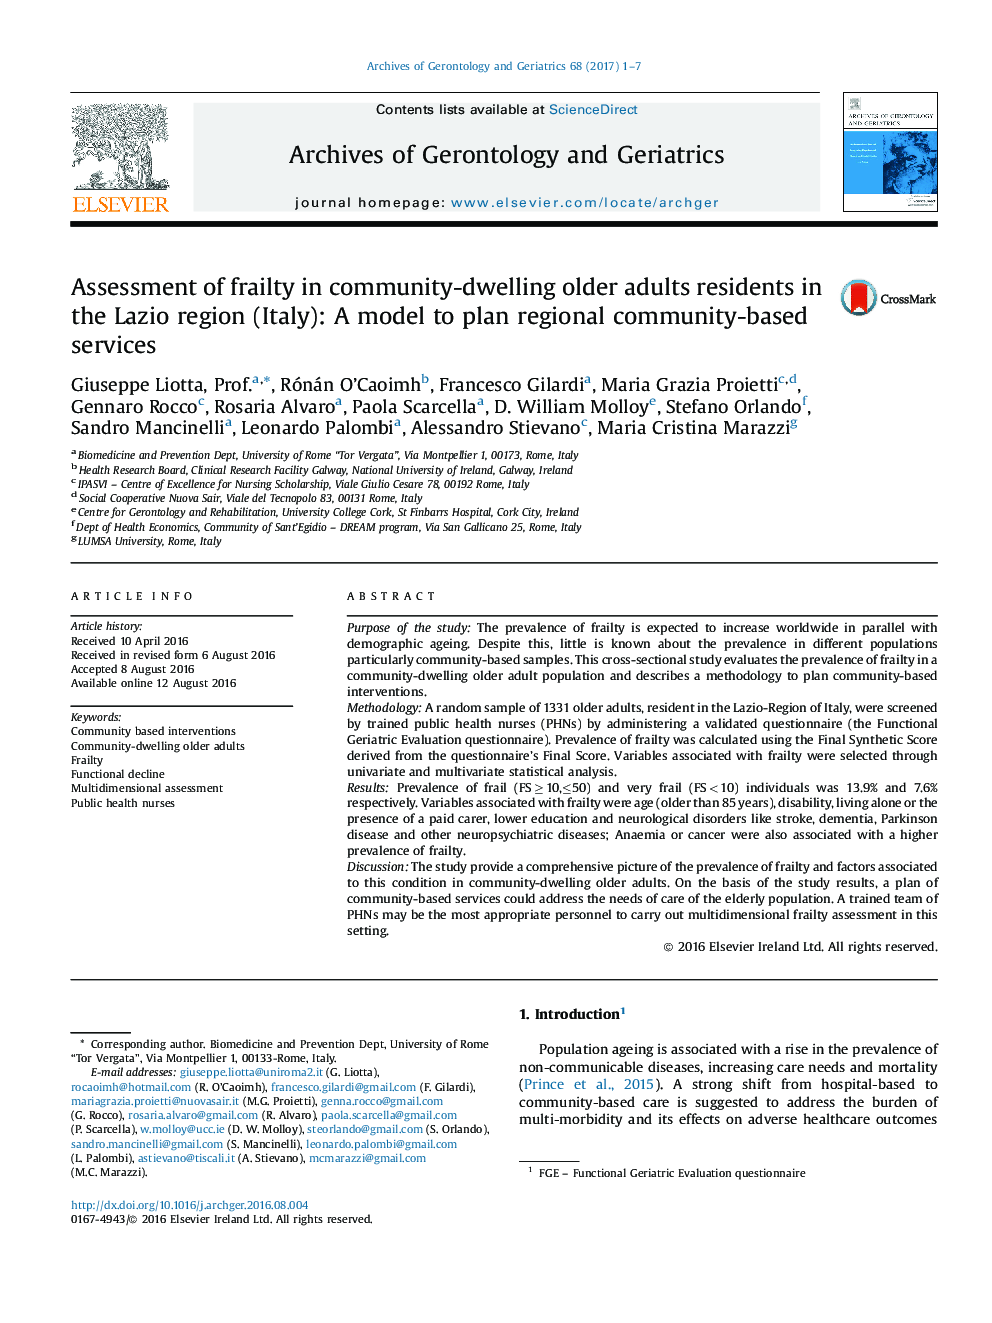 Assessment of frailty in community-dwelling older adults residents in the Lazio region (Italy): A model to plan regional community-based services